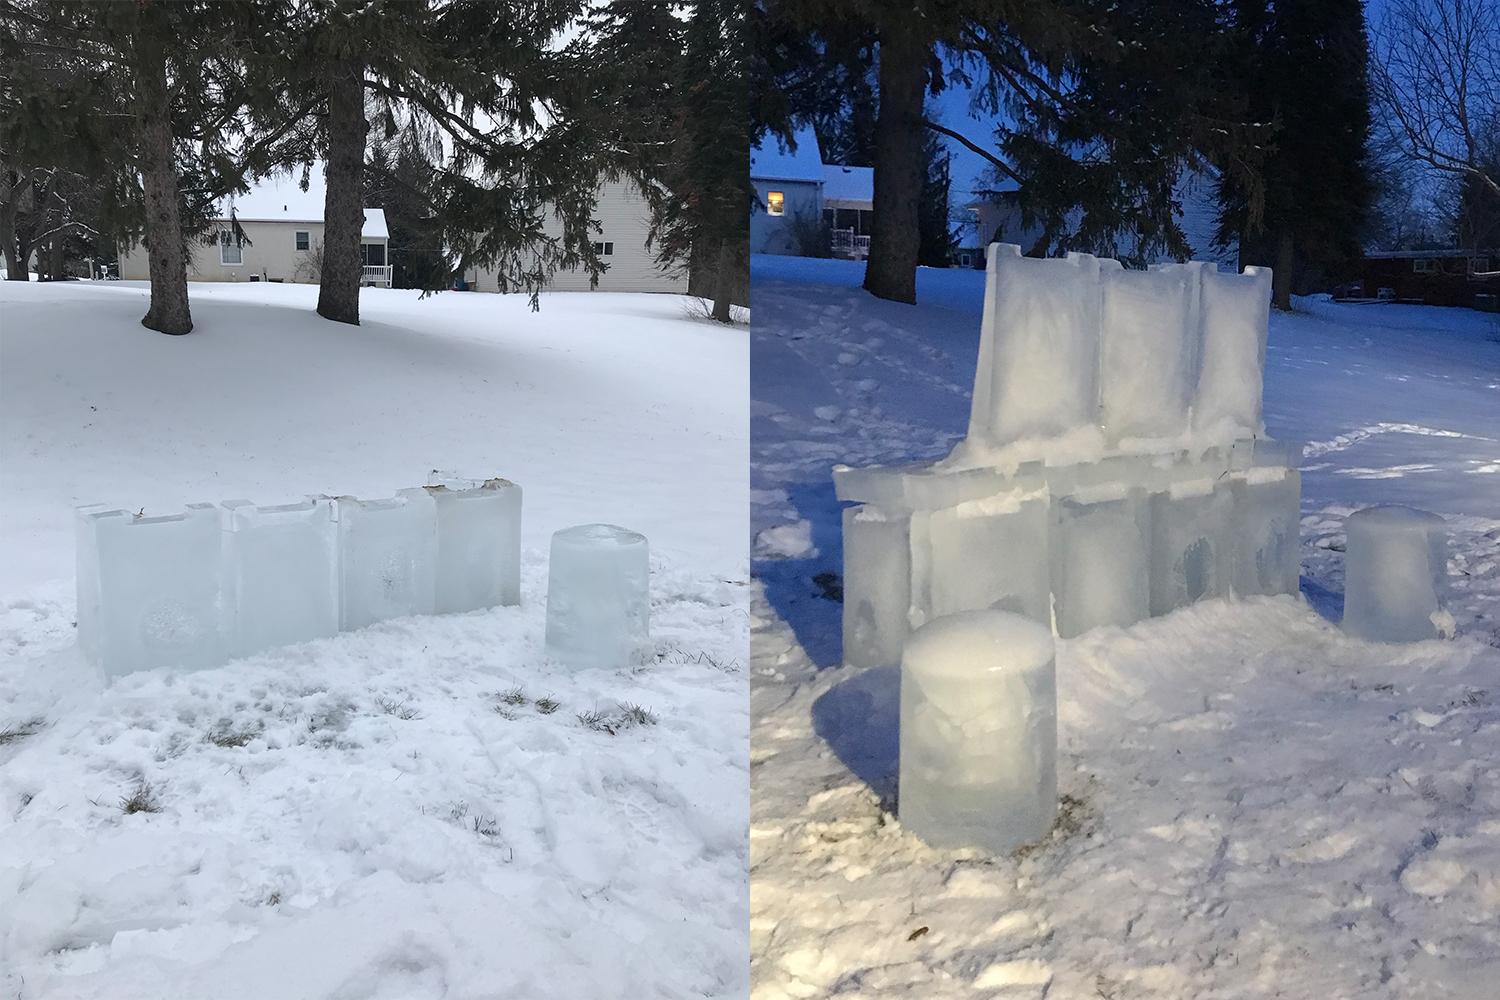 Two phases of making an ice bar, the first level in the snow on the left and the second level with ice blocks on the right